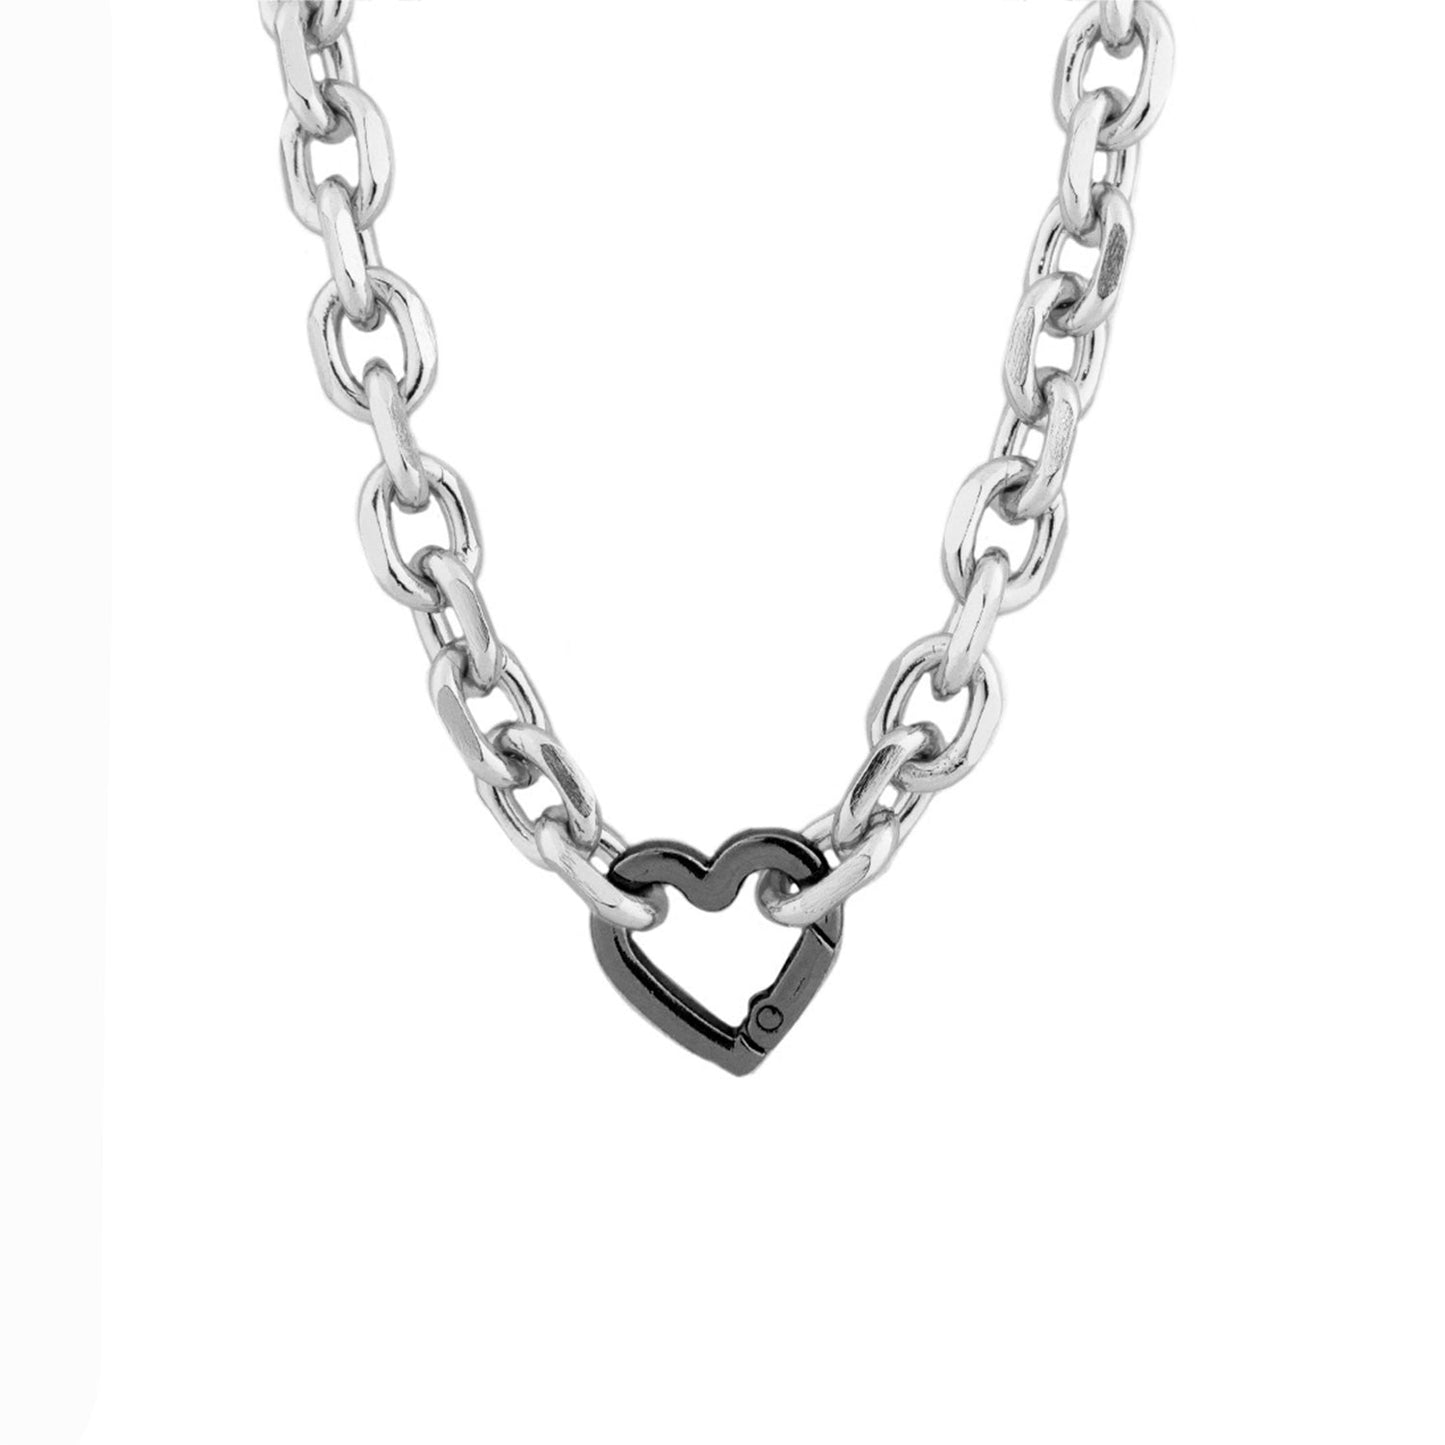 chain link heart clasp necklace